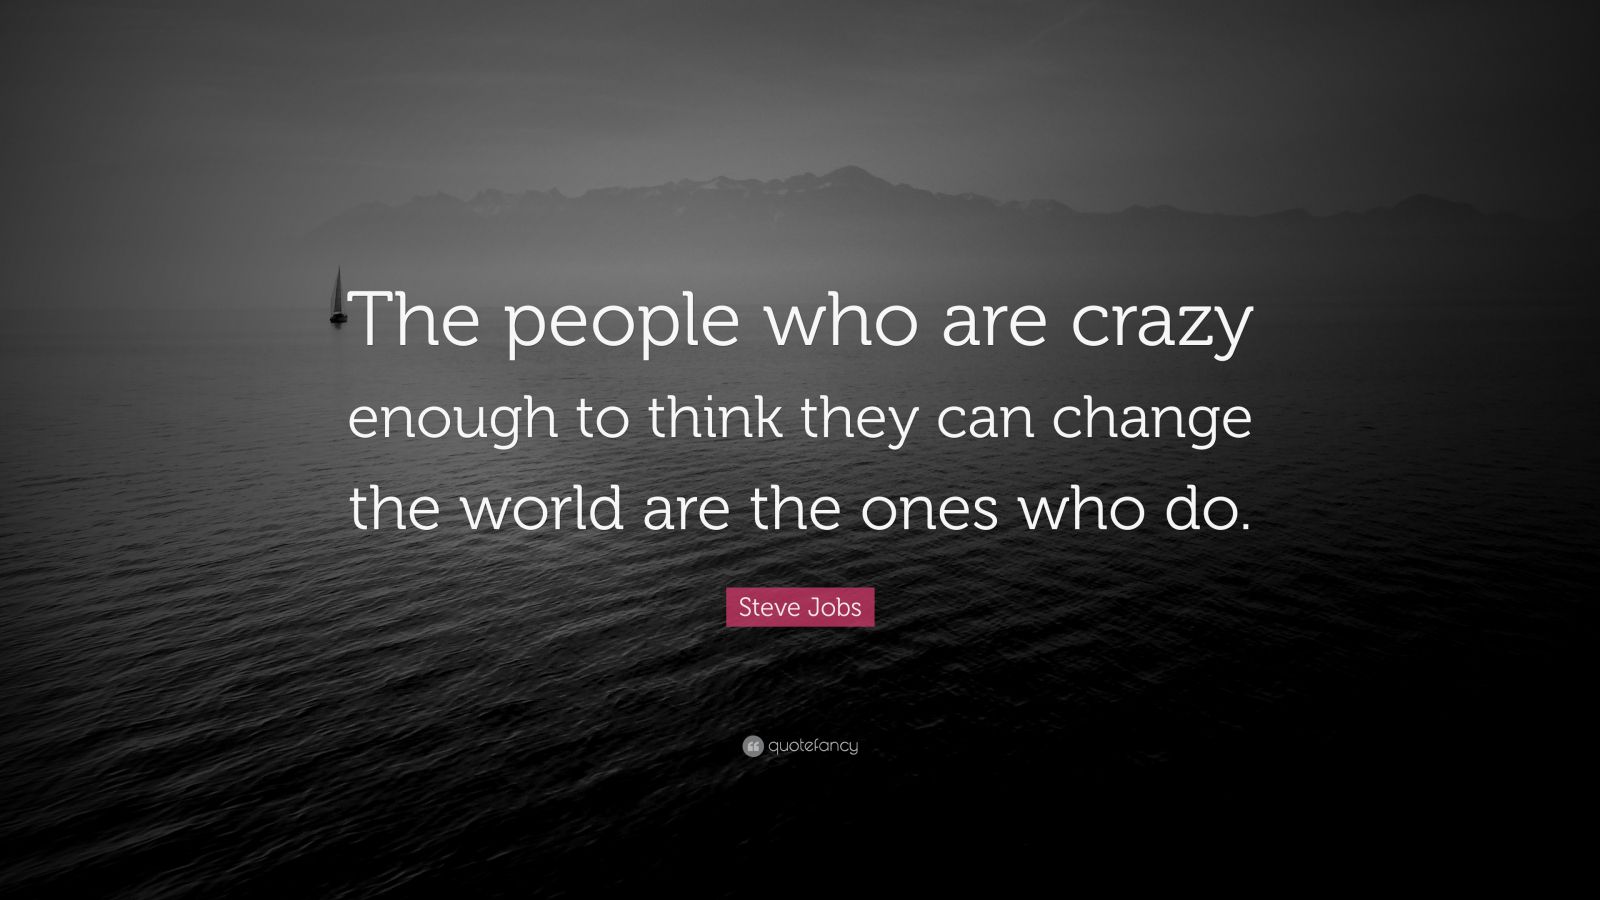 Steve Jobs Quote: “The people who are crazy enough to think they can